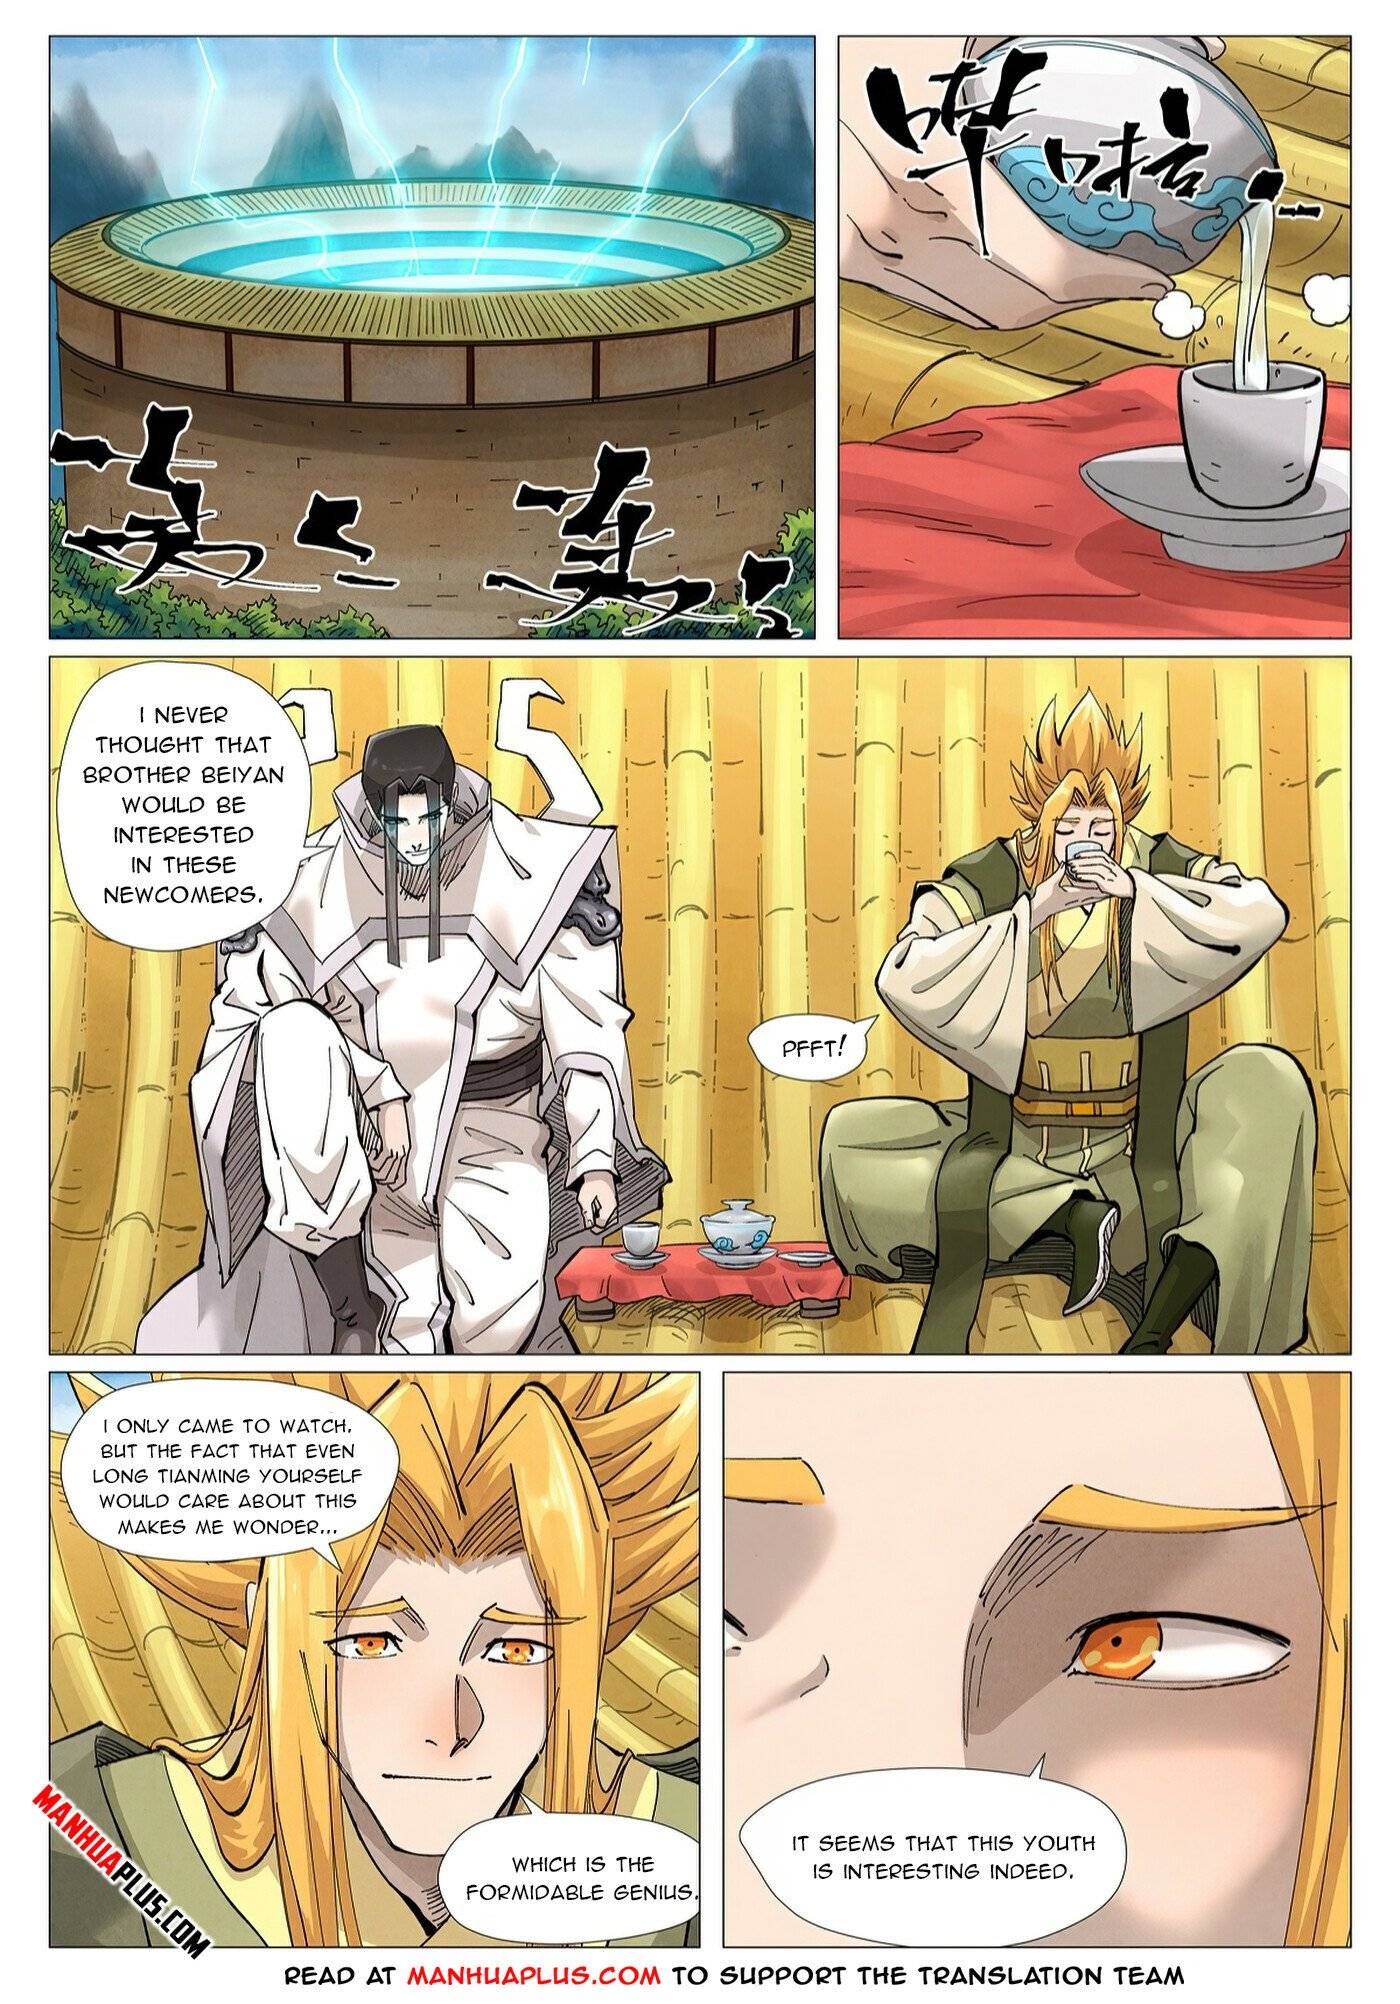 Tales of Demons and Gods Manhua Chapter 370.5 - Page 2